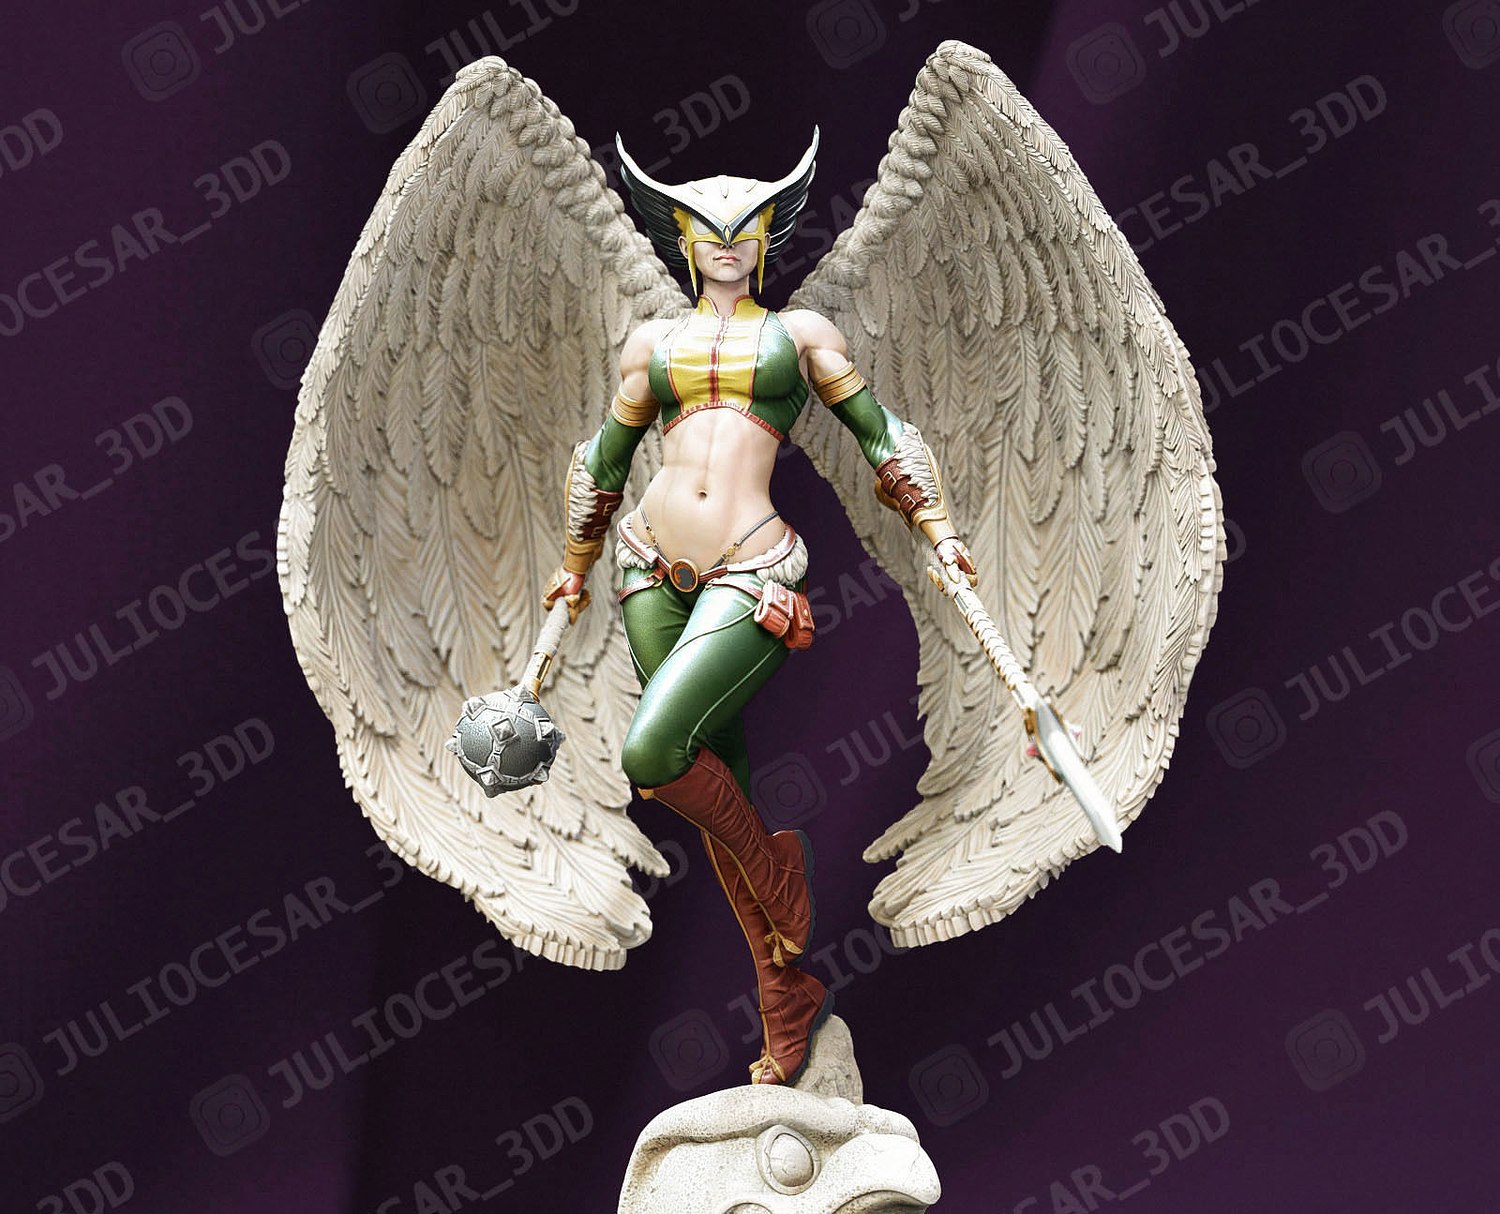 HawkGirl from DC